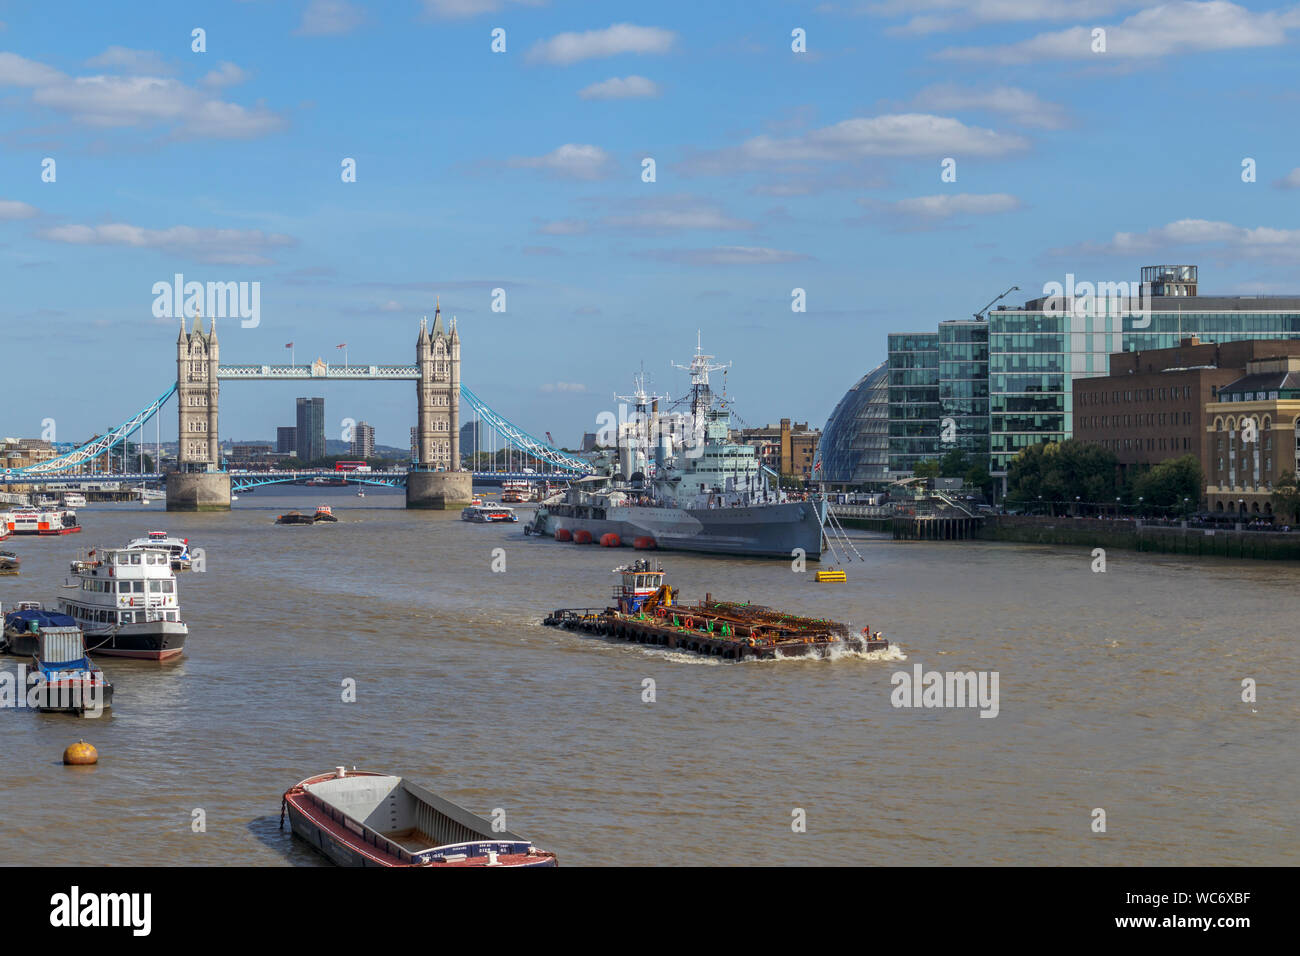 A large barge in the Pool of London on the River Thames with a view of the iconic Tower Bridge and HMS Belfast, viewed from London Bridge Stock Photo